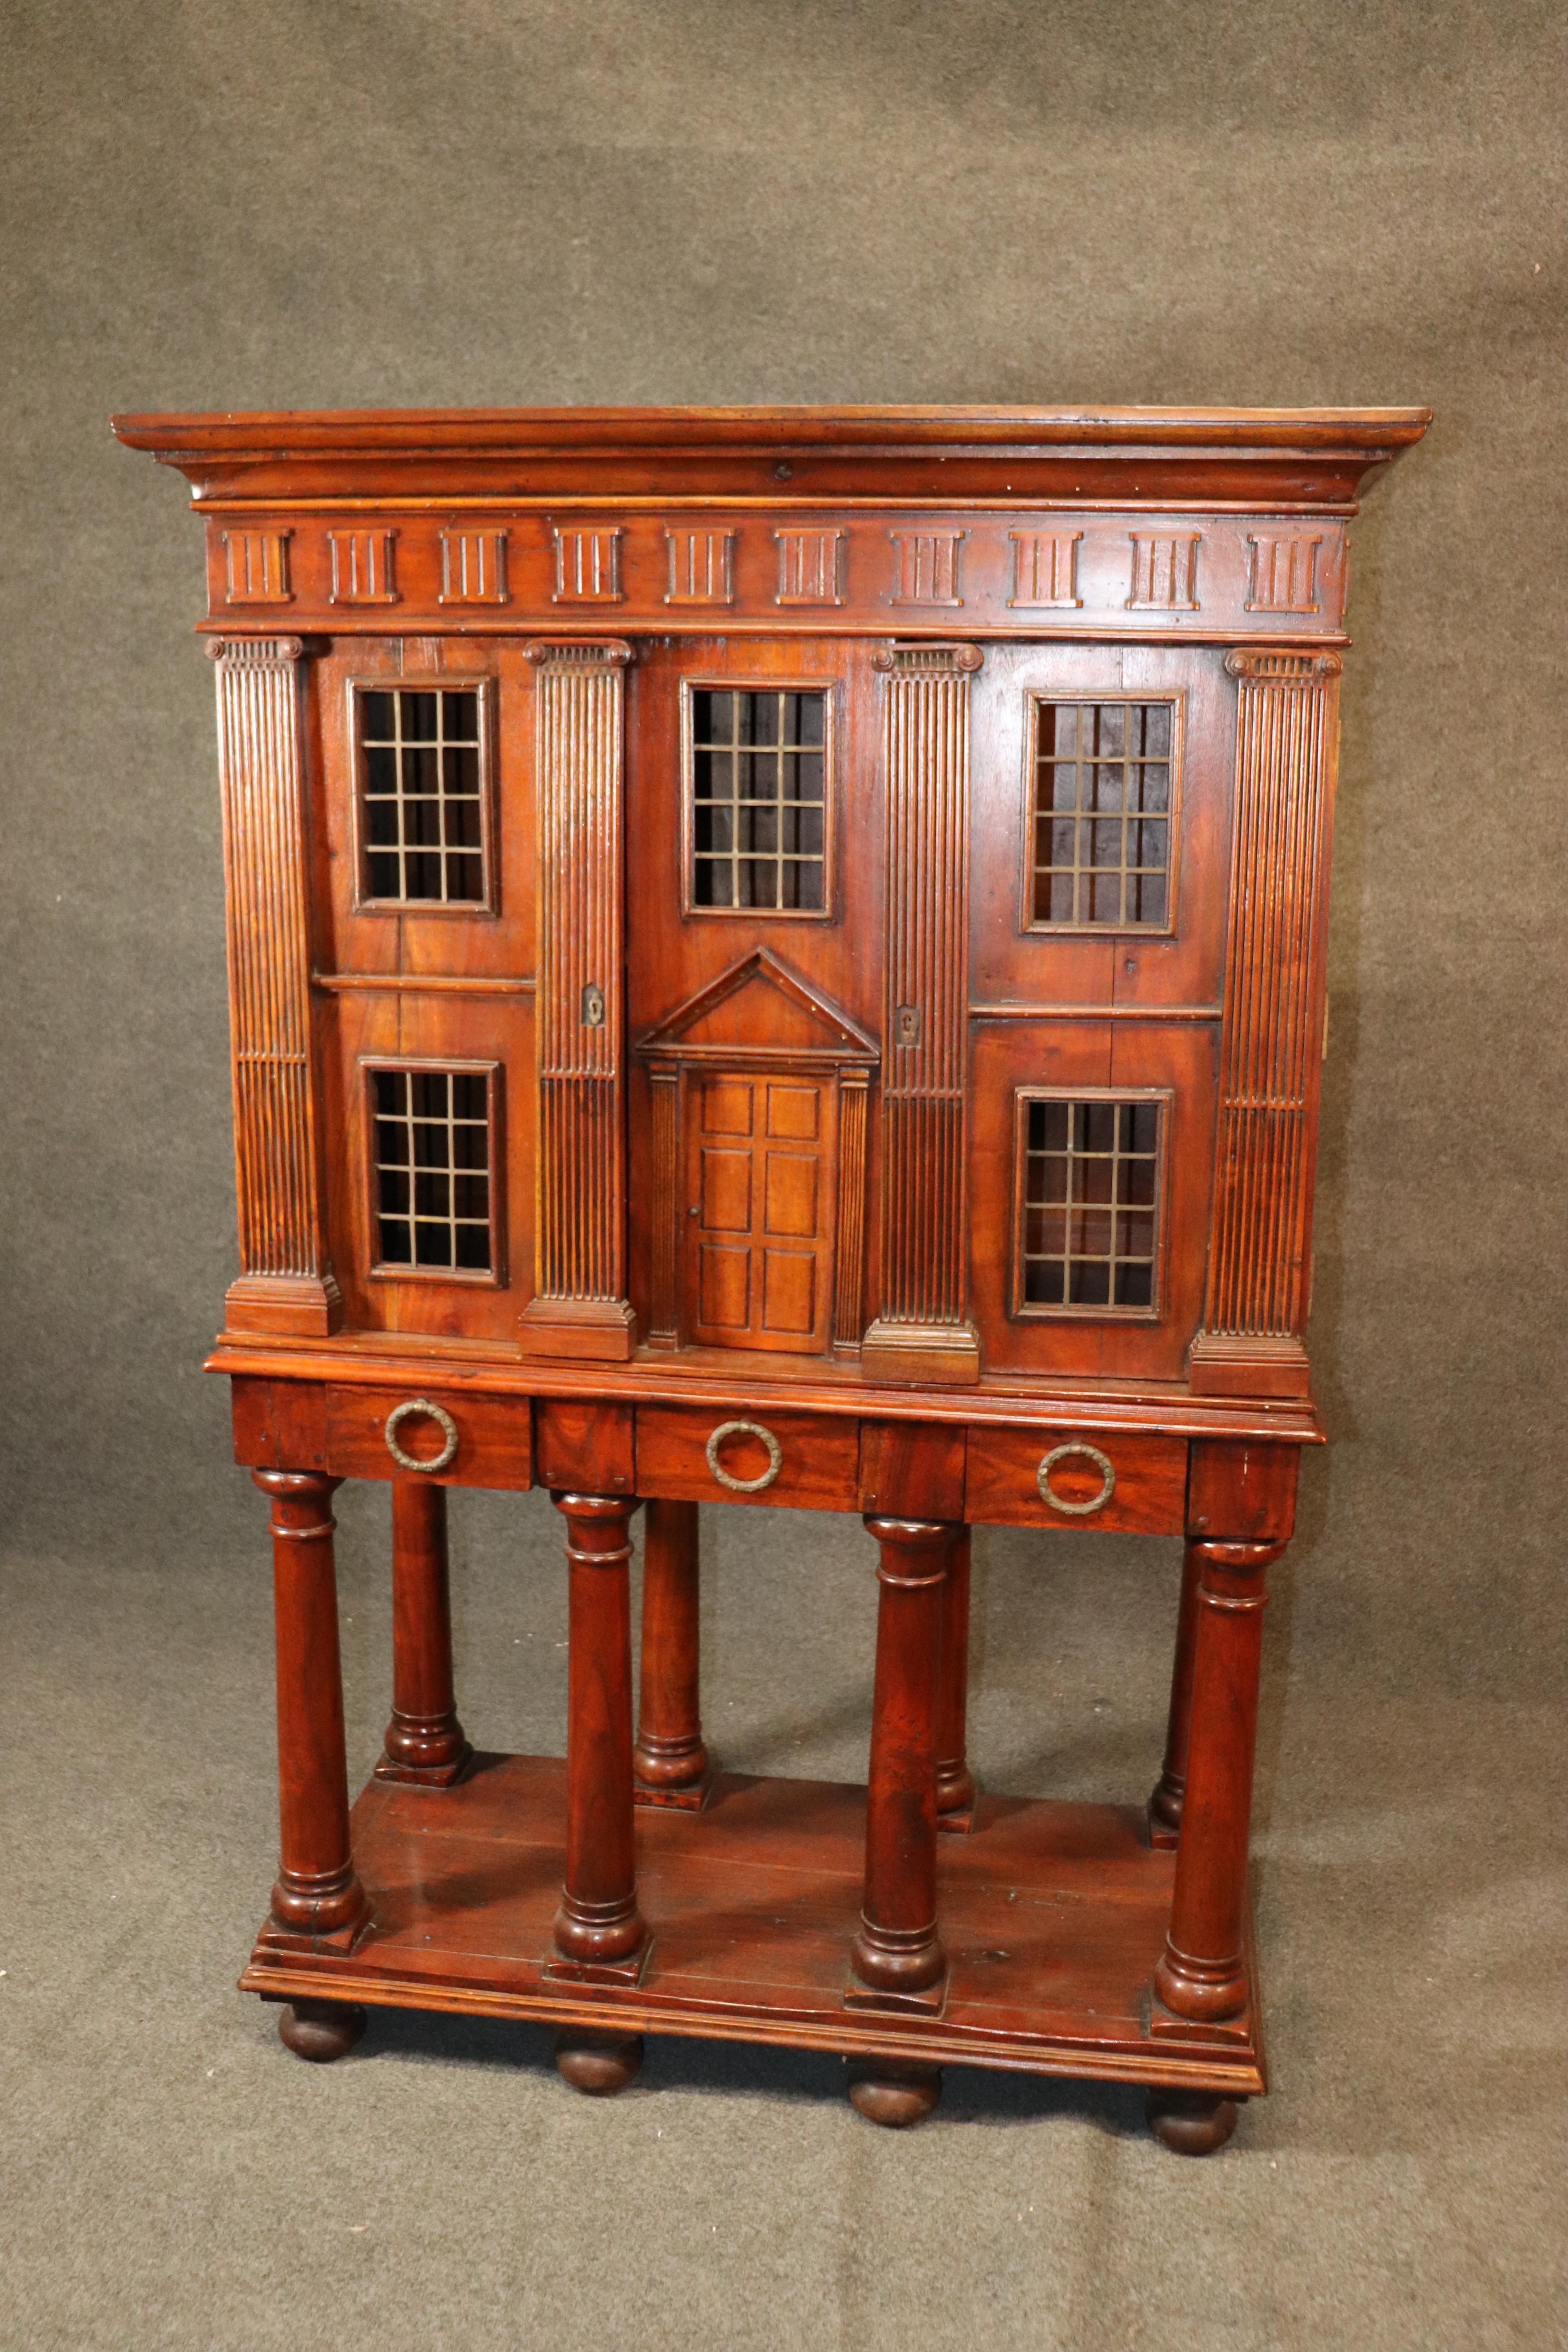 This cabinet was designed to look like an Italian or Spanish Villa or mansion. The cabinet is made of solid mahogany and is in good vintage condition. The cabinet appears to be 100 years old but truthfully it can be older or newer than that. Its